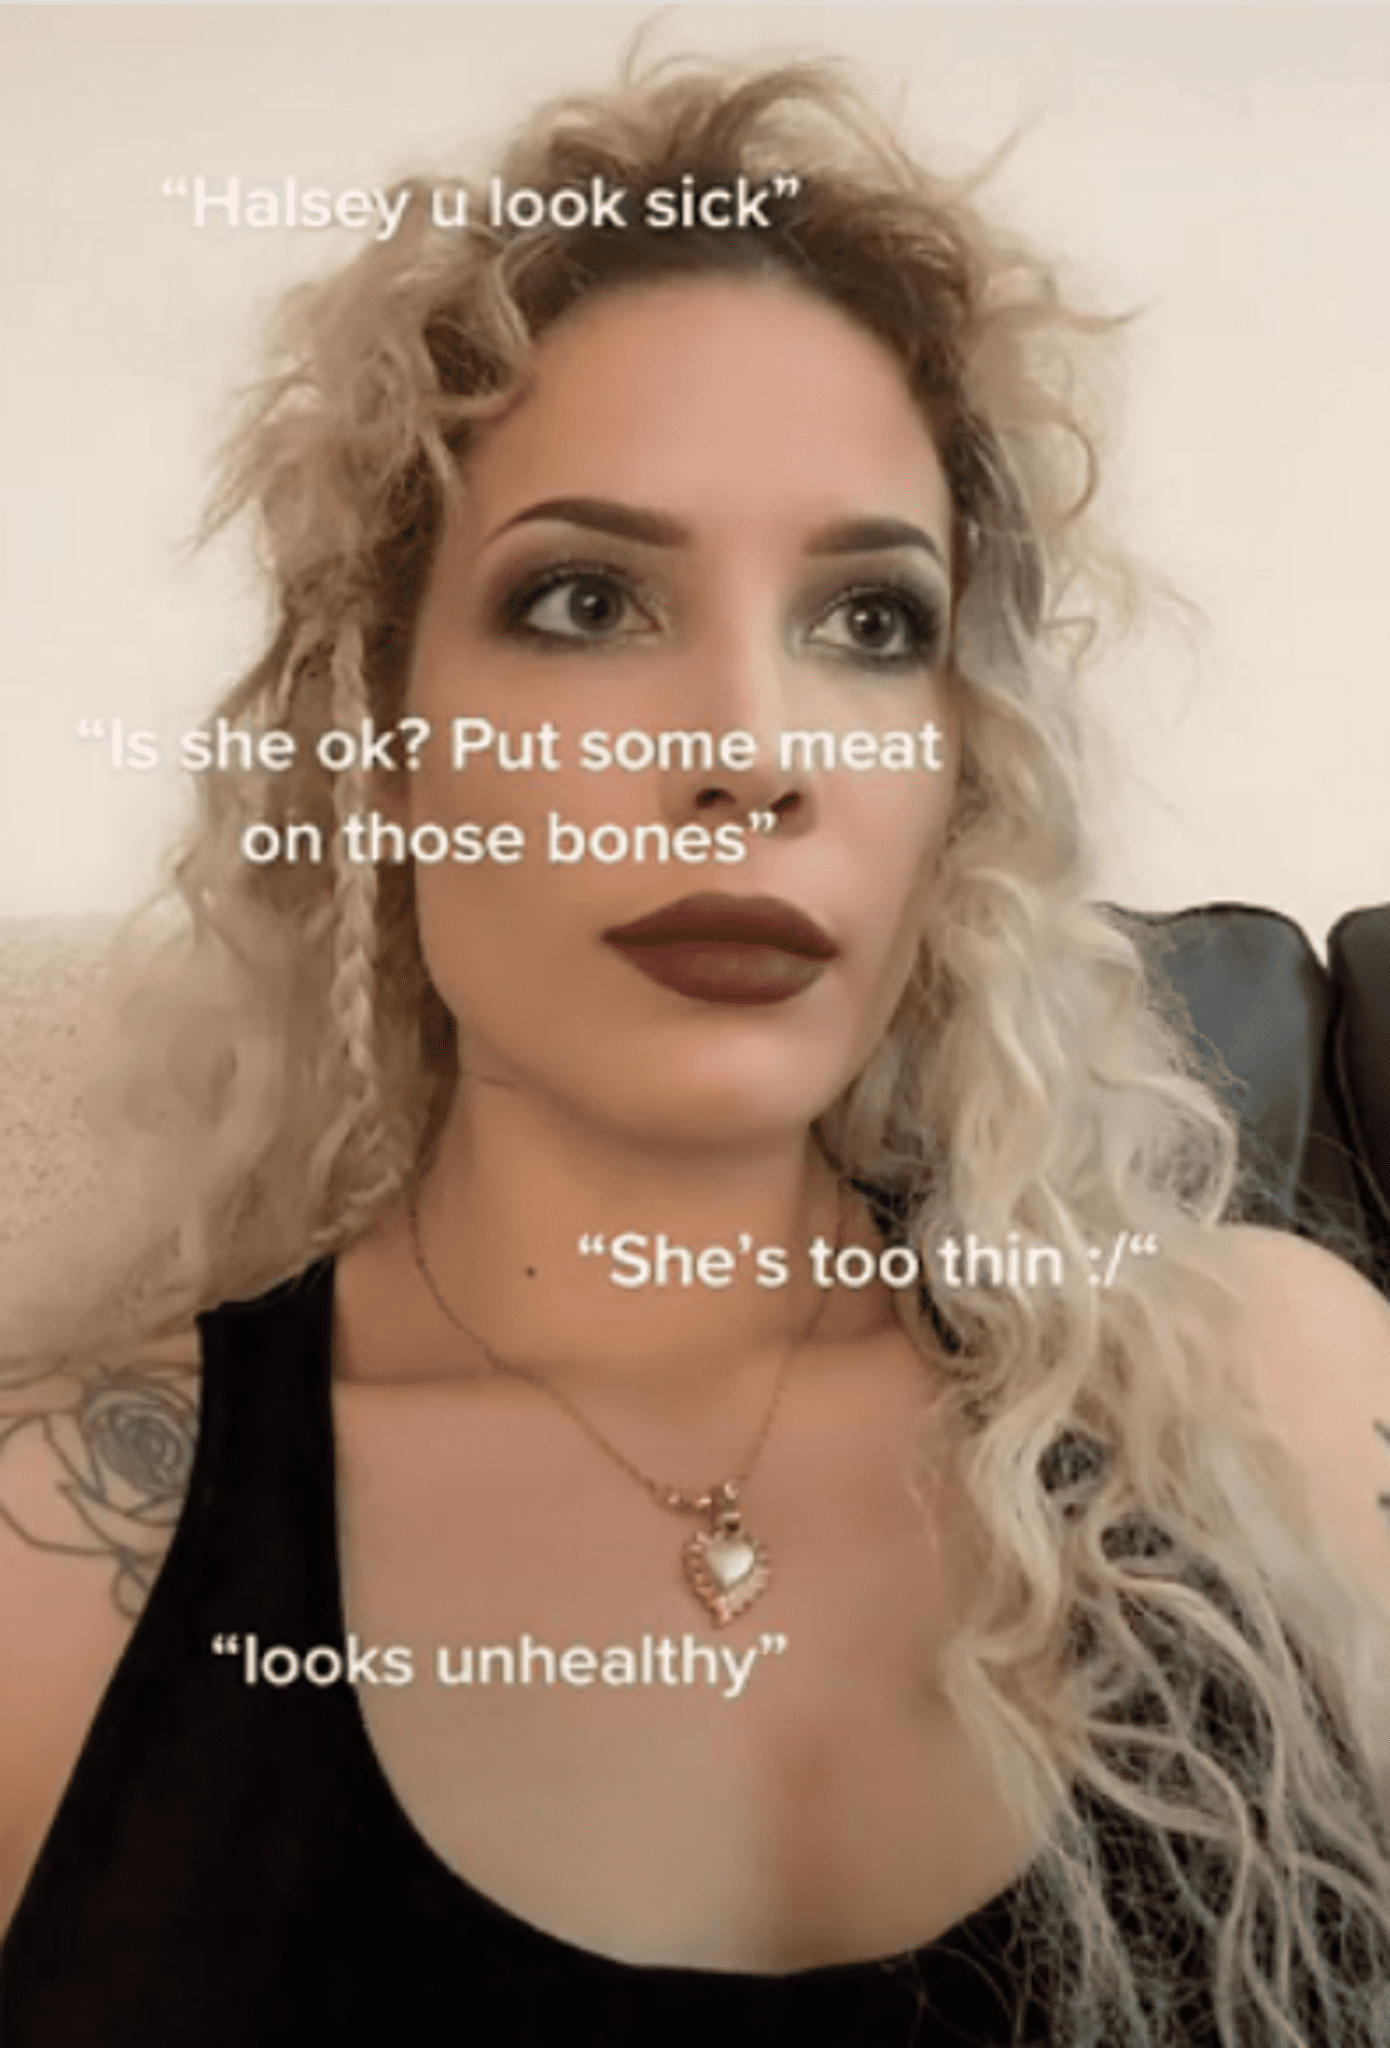 Halsey responds to critics' accusations about her 'unhealthy' appearance